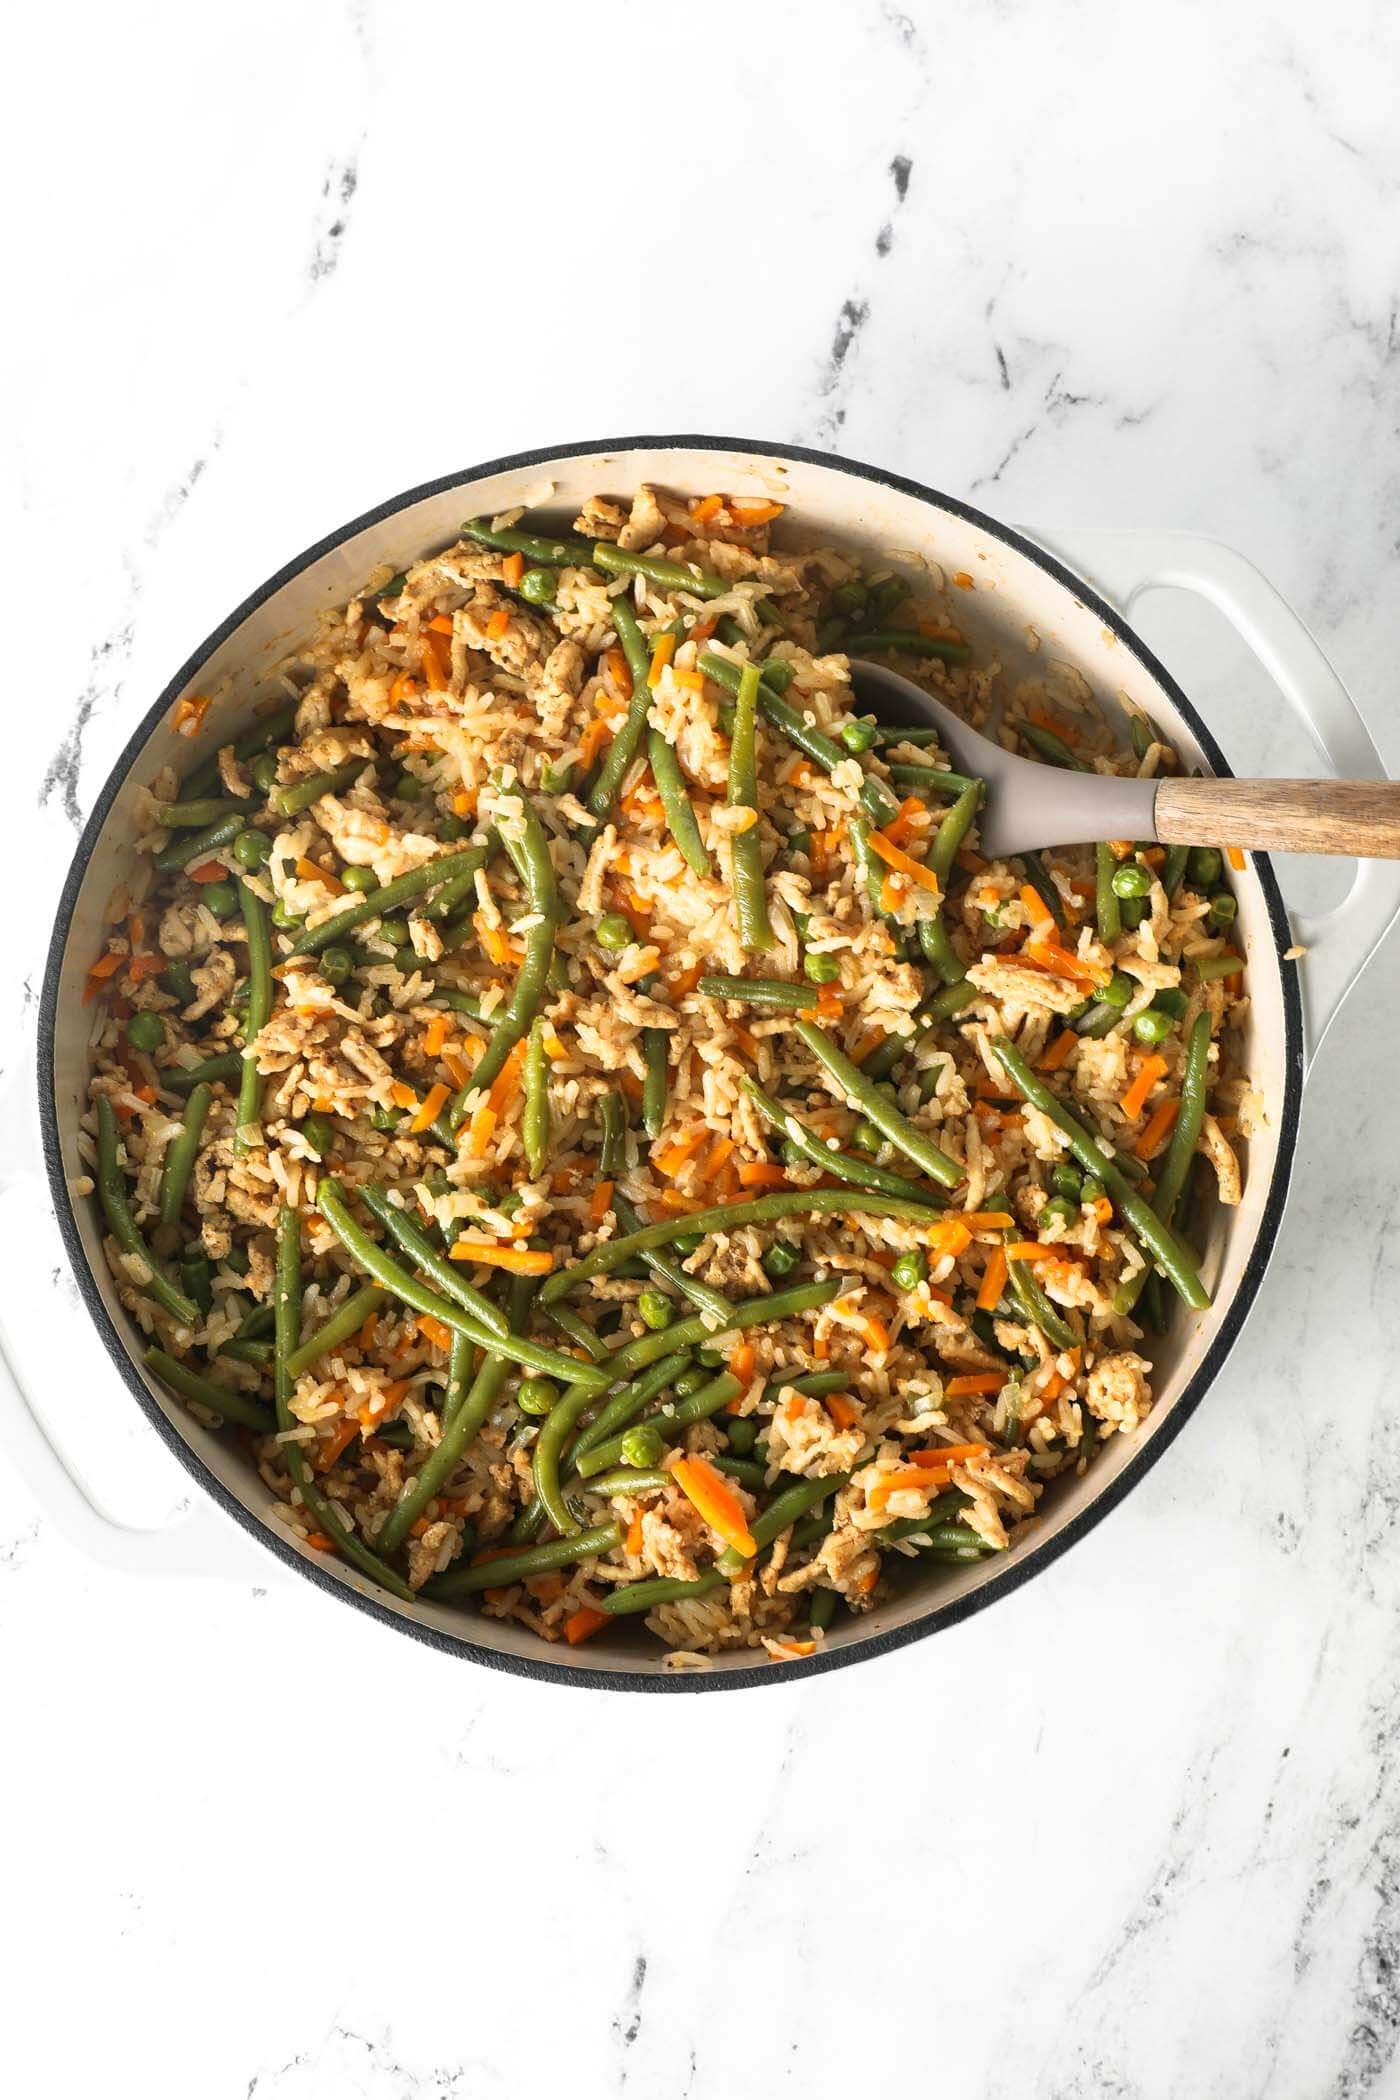 Overhead image of the cooked ground chicken and rice with veggies meal in a skillet with a serving spoon.